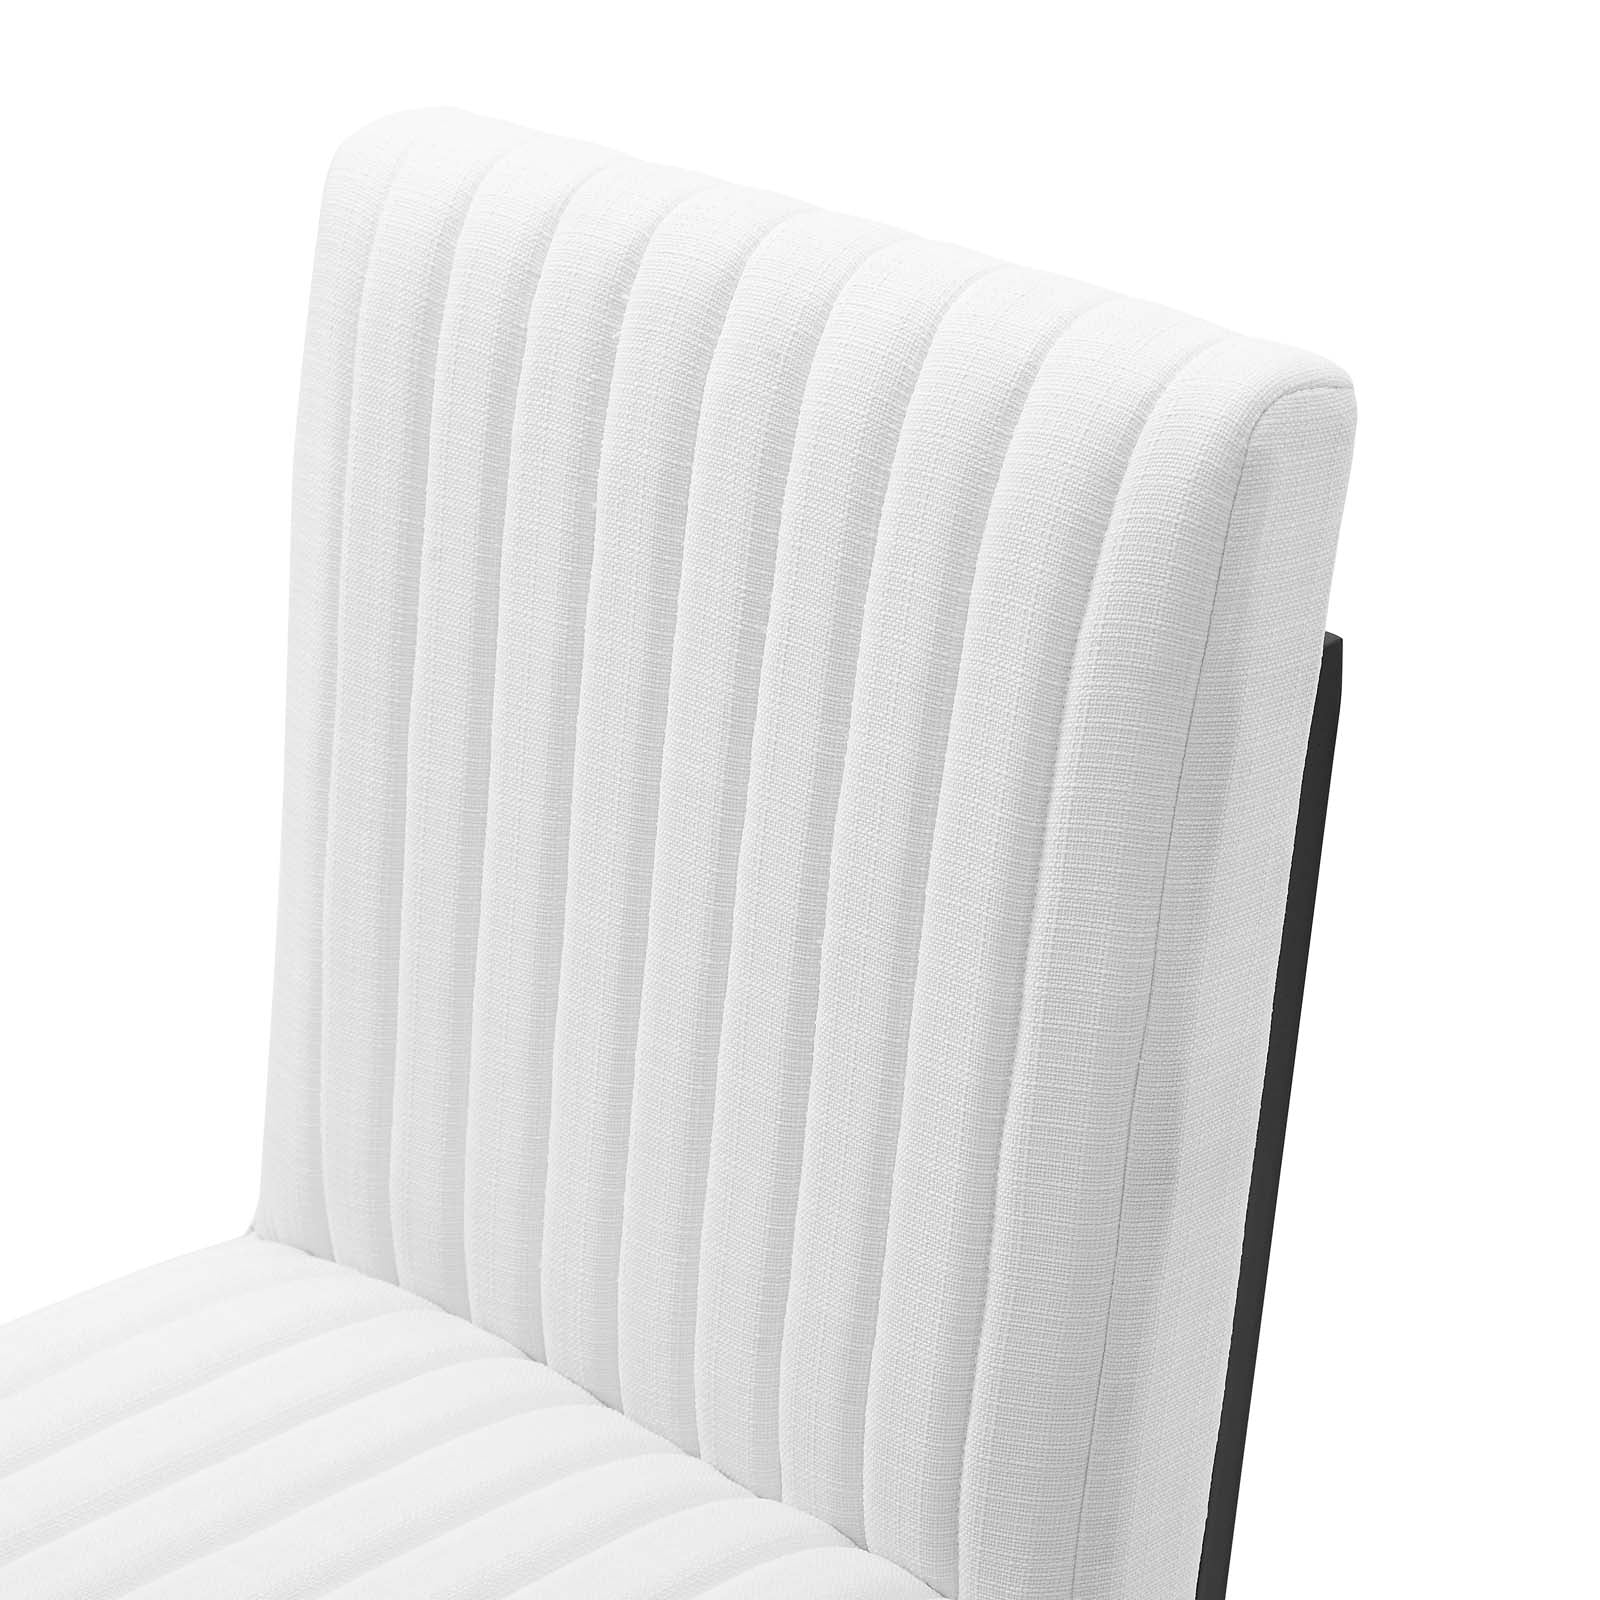 Indulge Channel Tufted Fabric Dining Chair-Dining Chair-Modway-Wall2Wall Furnishings